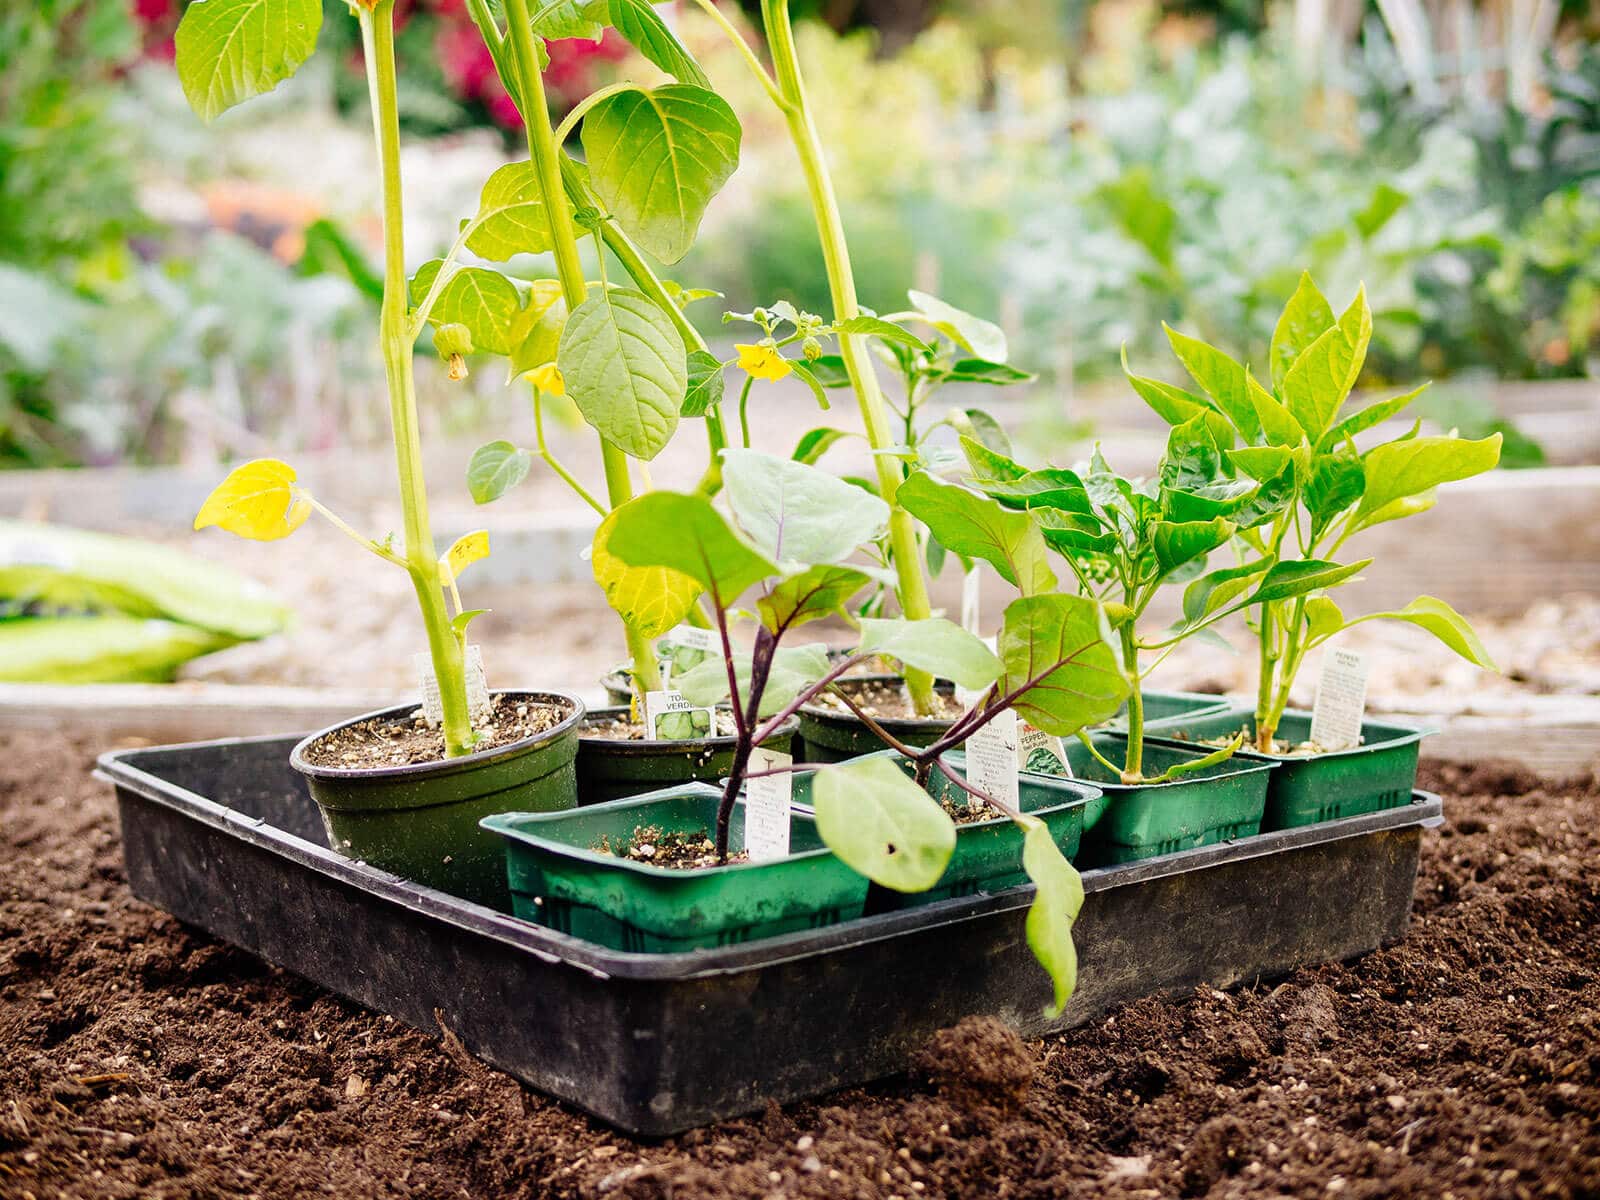 Seedlings purchased from a nursery should be hardened off before transplanting